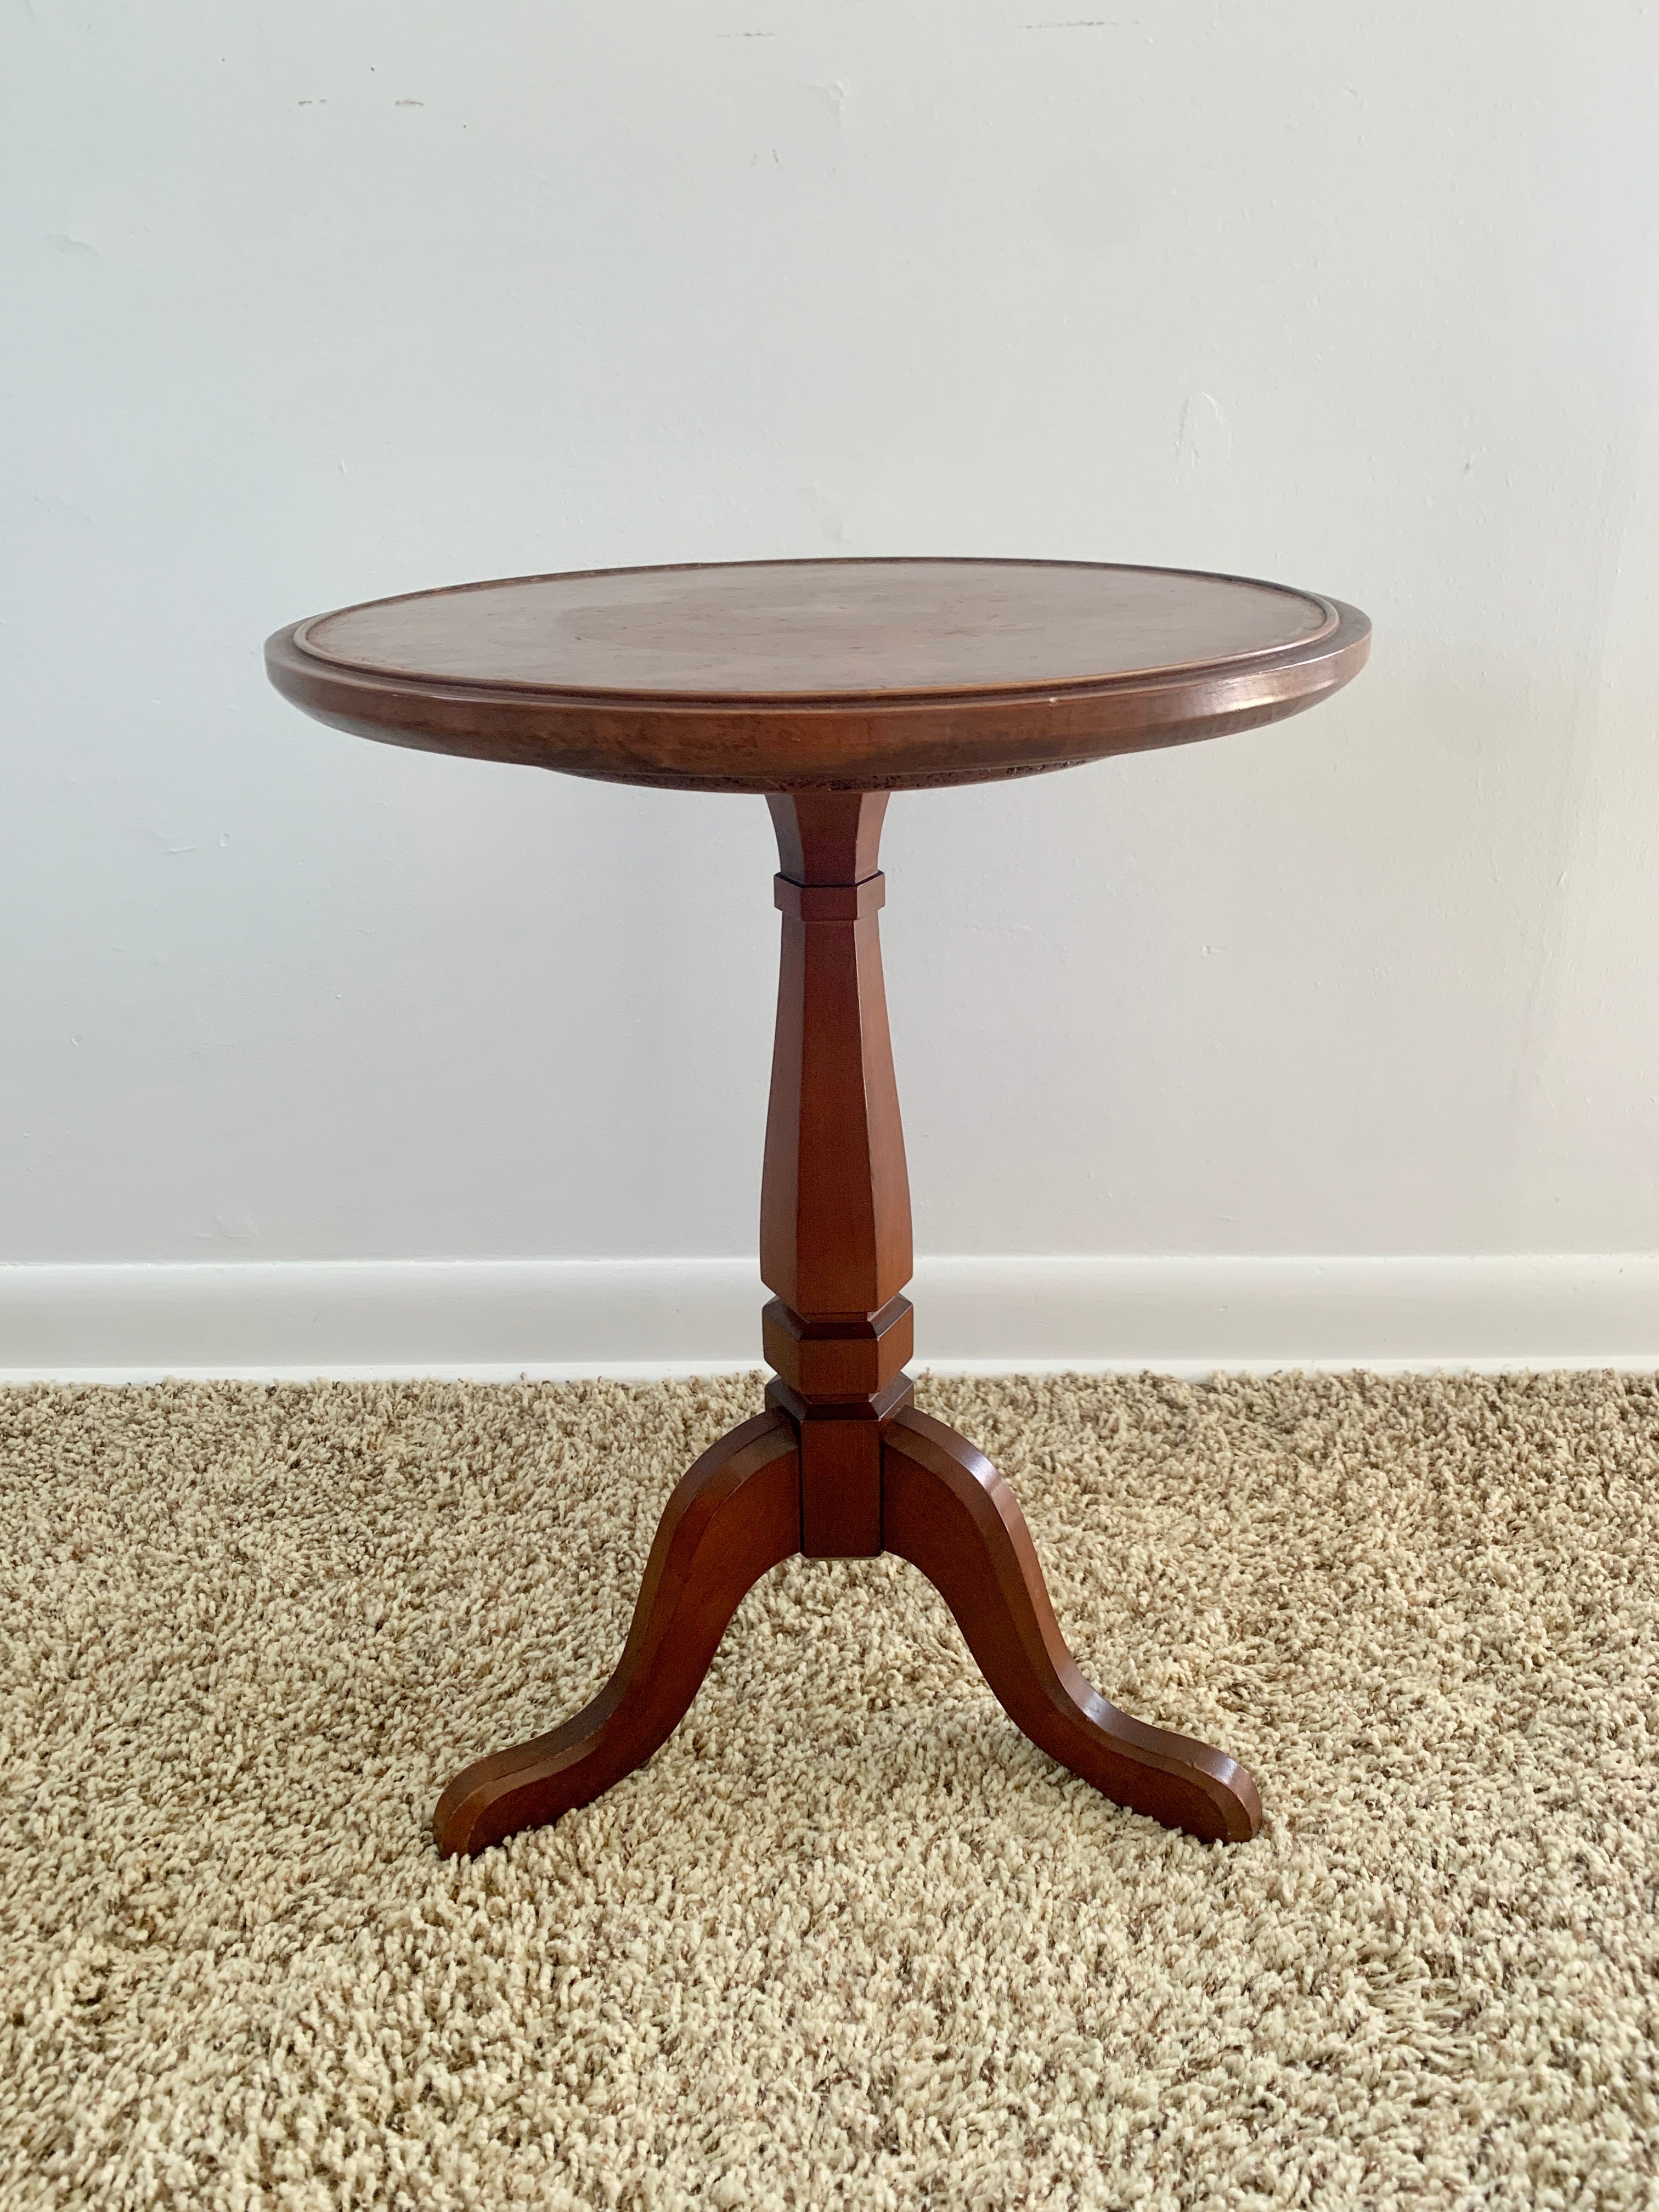 A gorgeous Georgian style round side table or drinks table

USA, Late 20th century

Carved cherry wood, with embossed leather top

Measures: 16